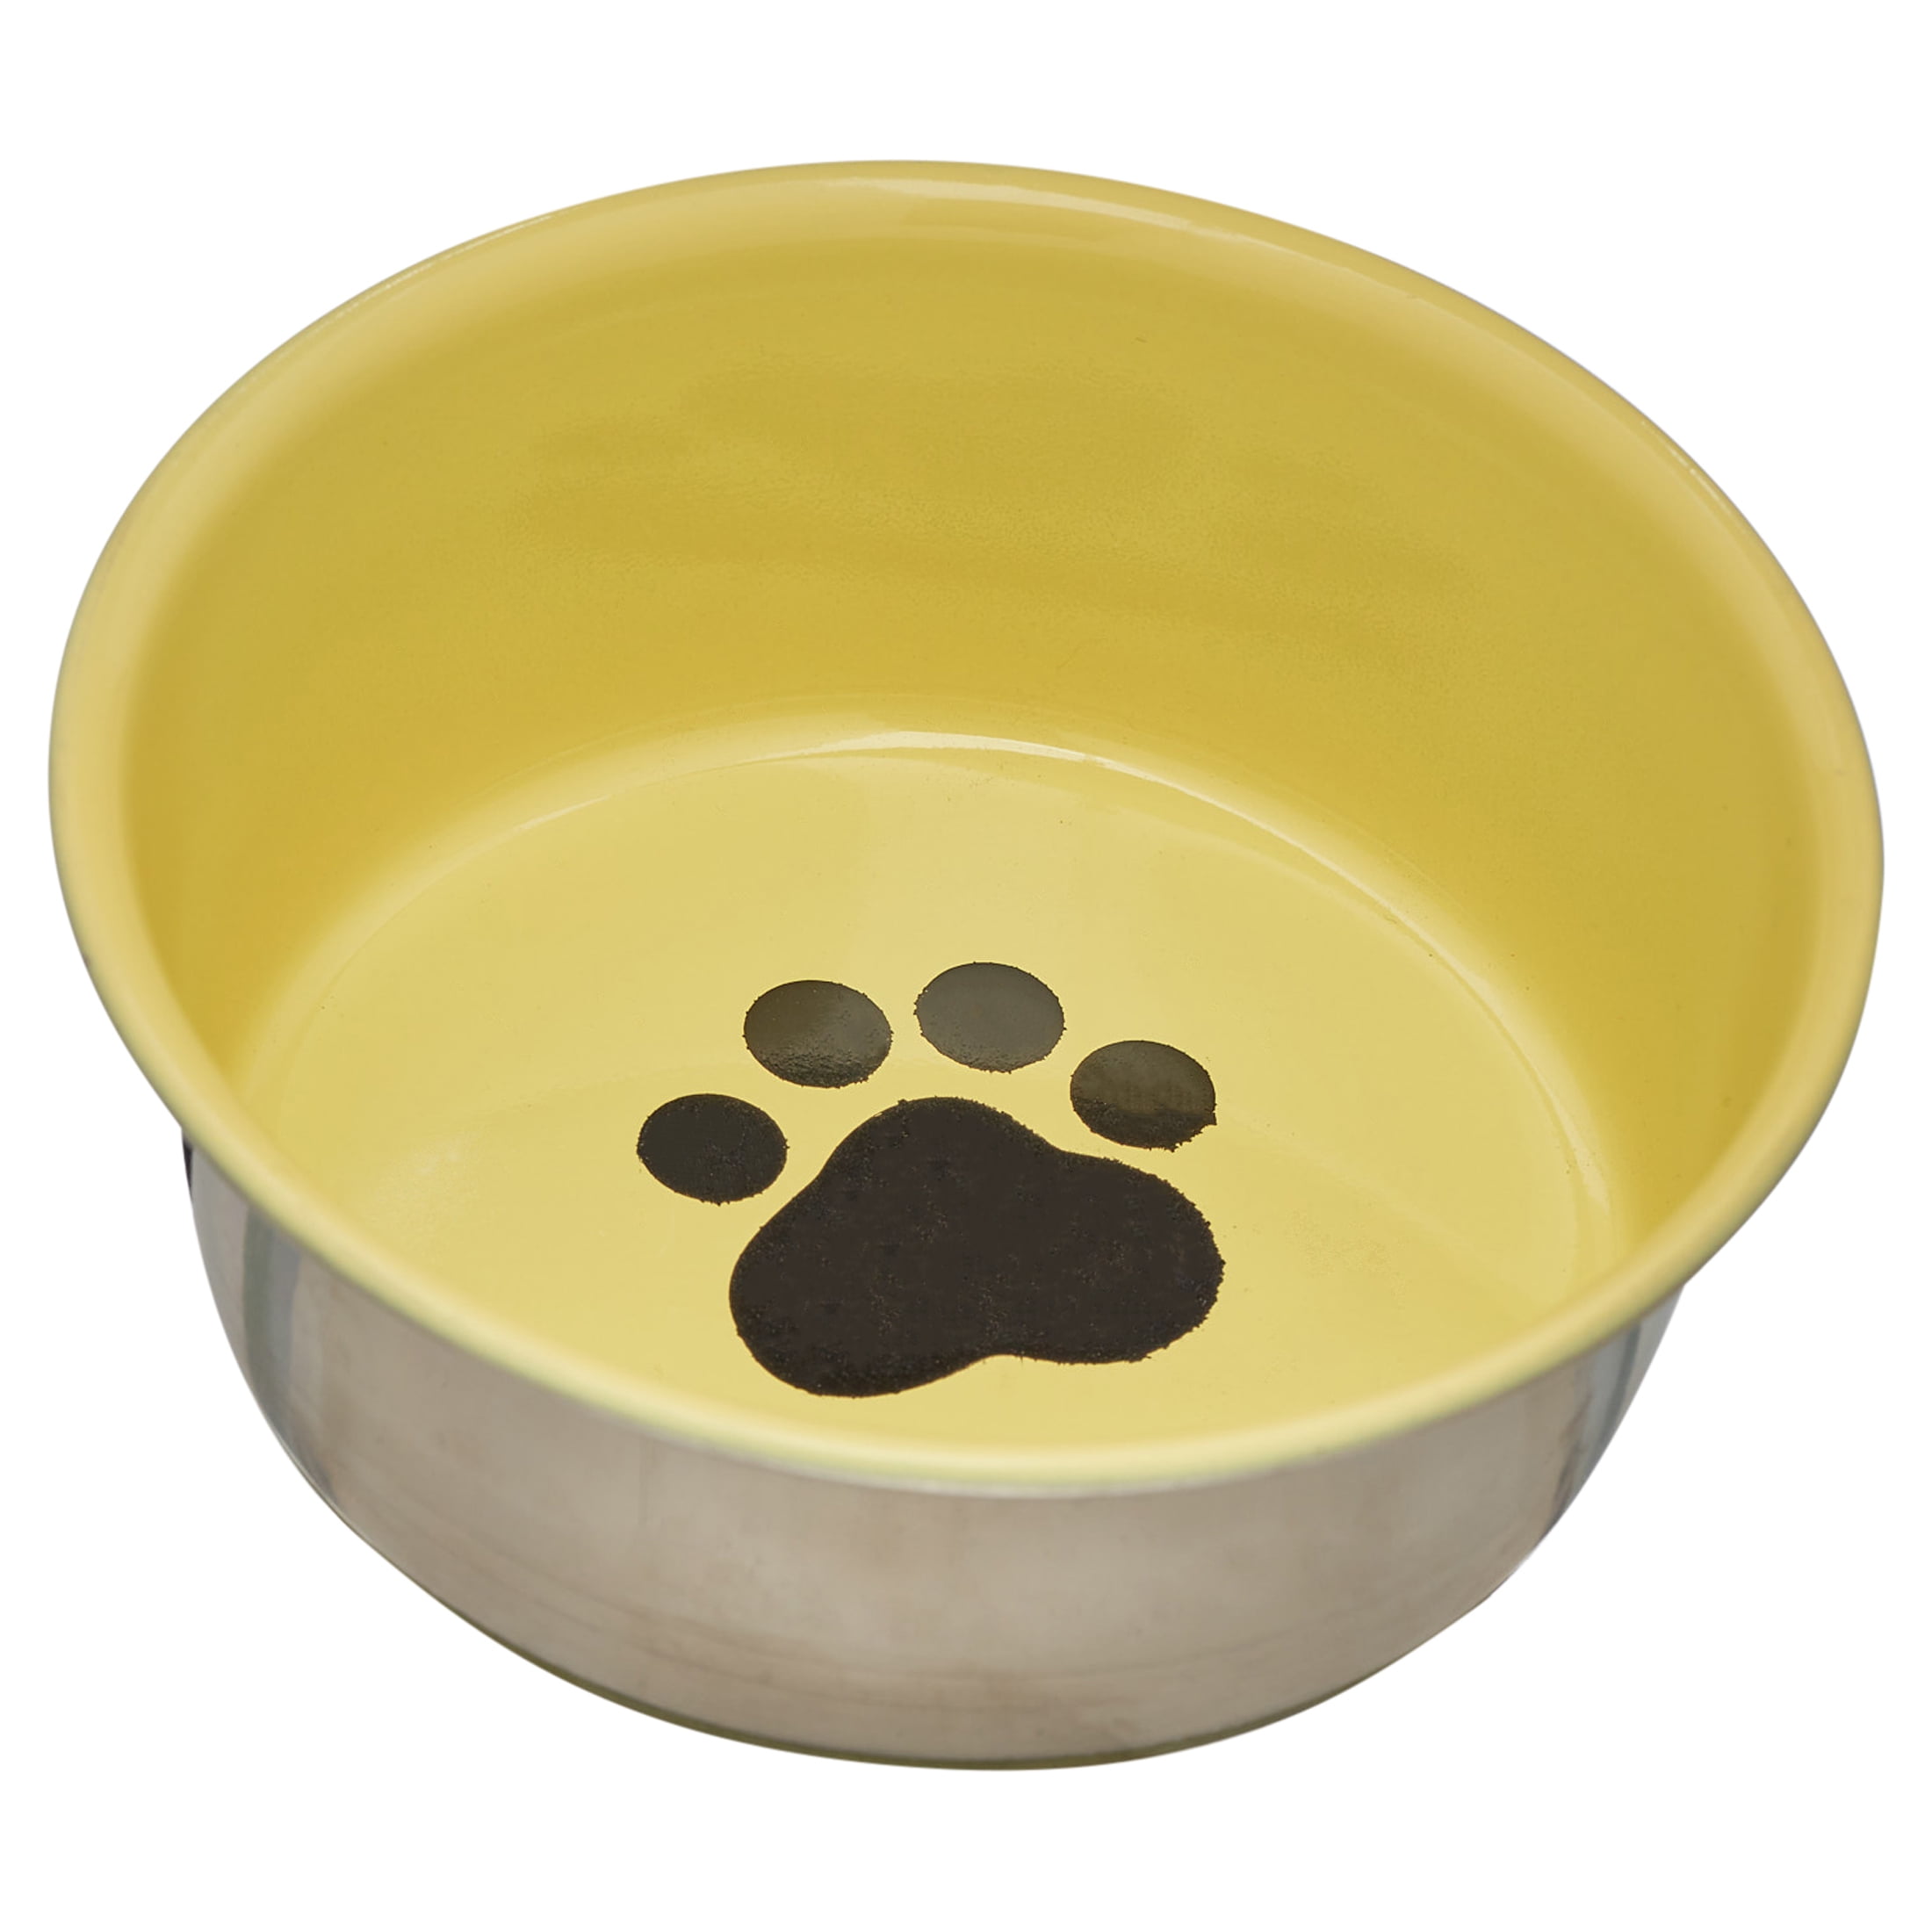 225074 8 Oz Stainless Steel Non-skid Cat Dish With Decorated Enamel Interior - Assorted